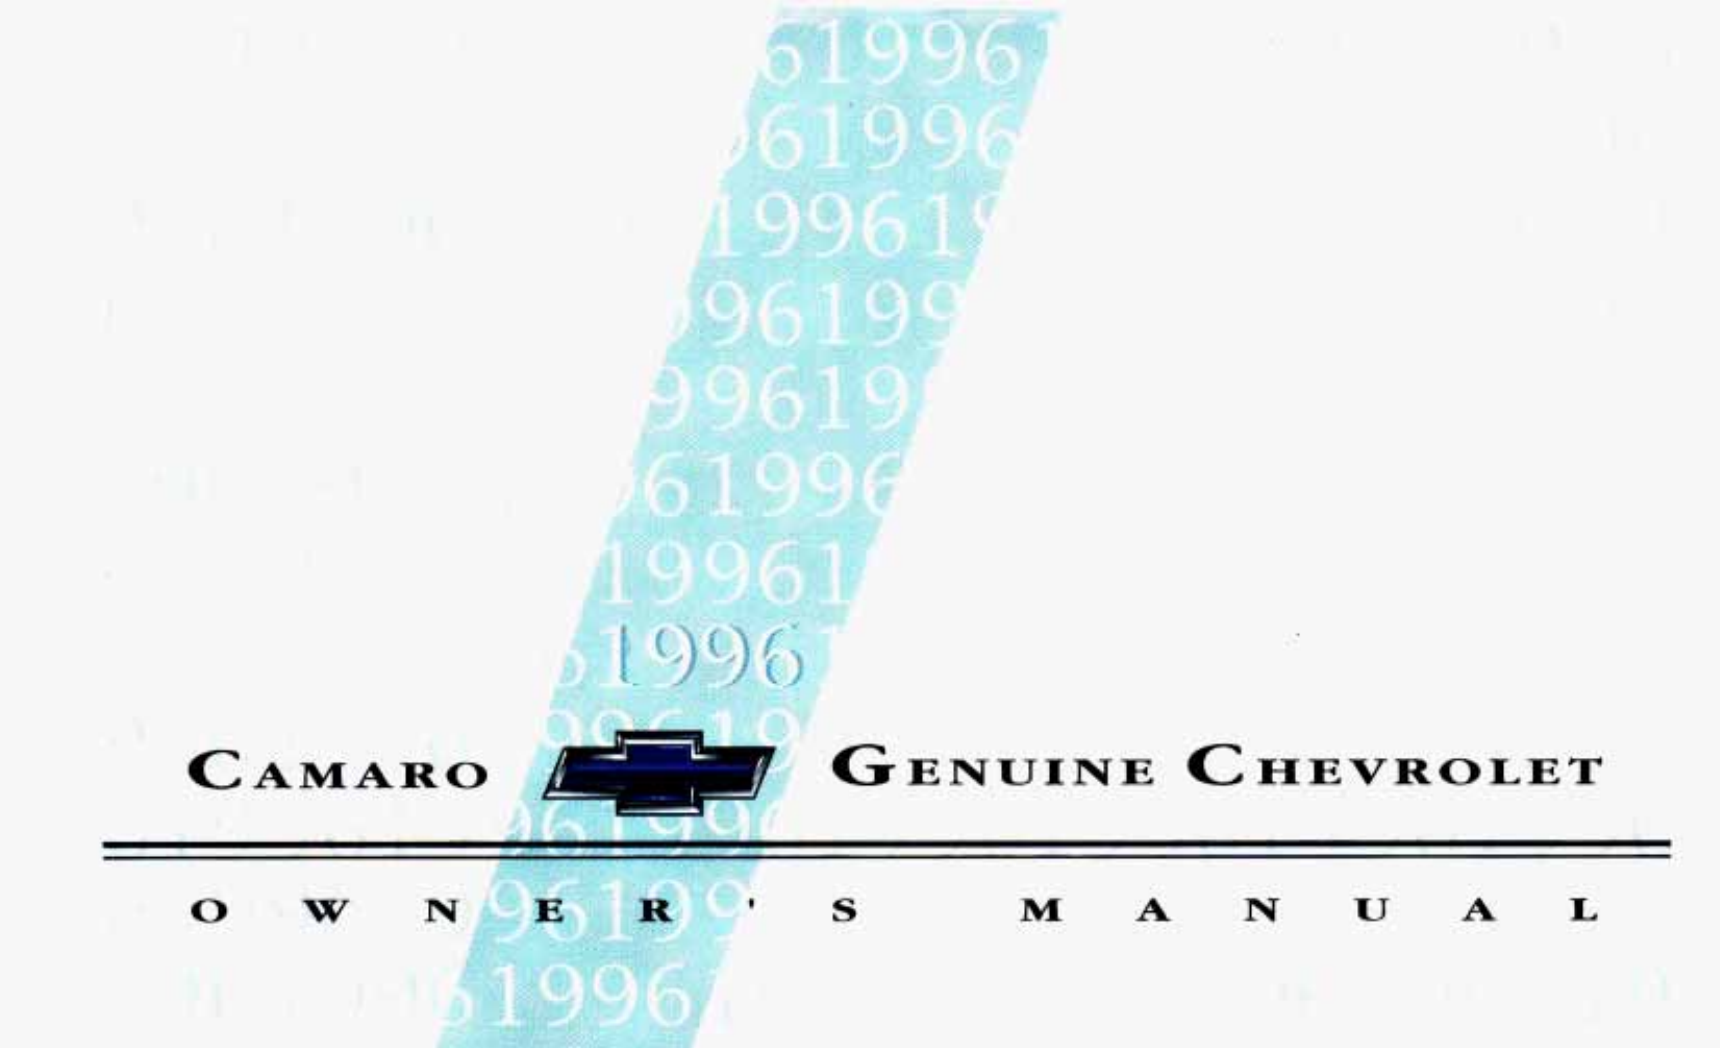 1996 Chevrolet Camaro owners manual Preview image 6